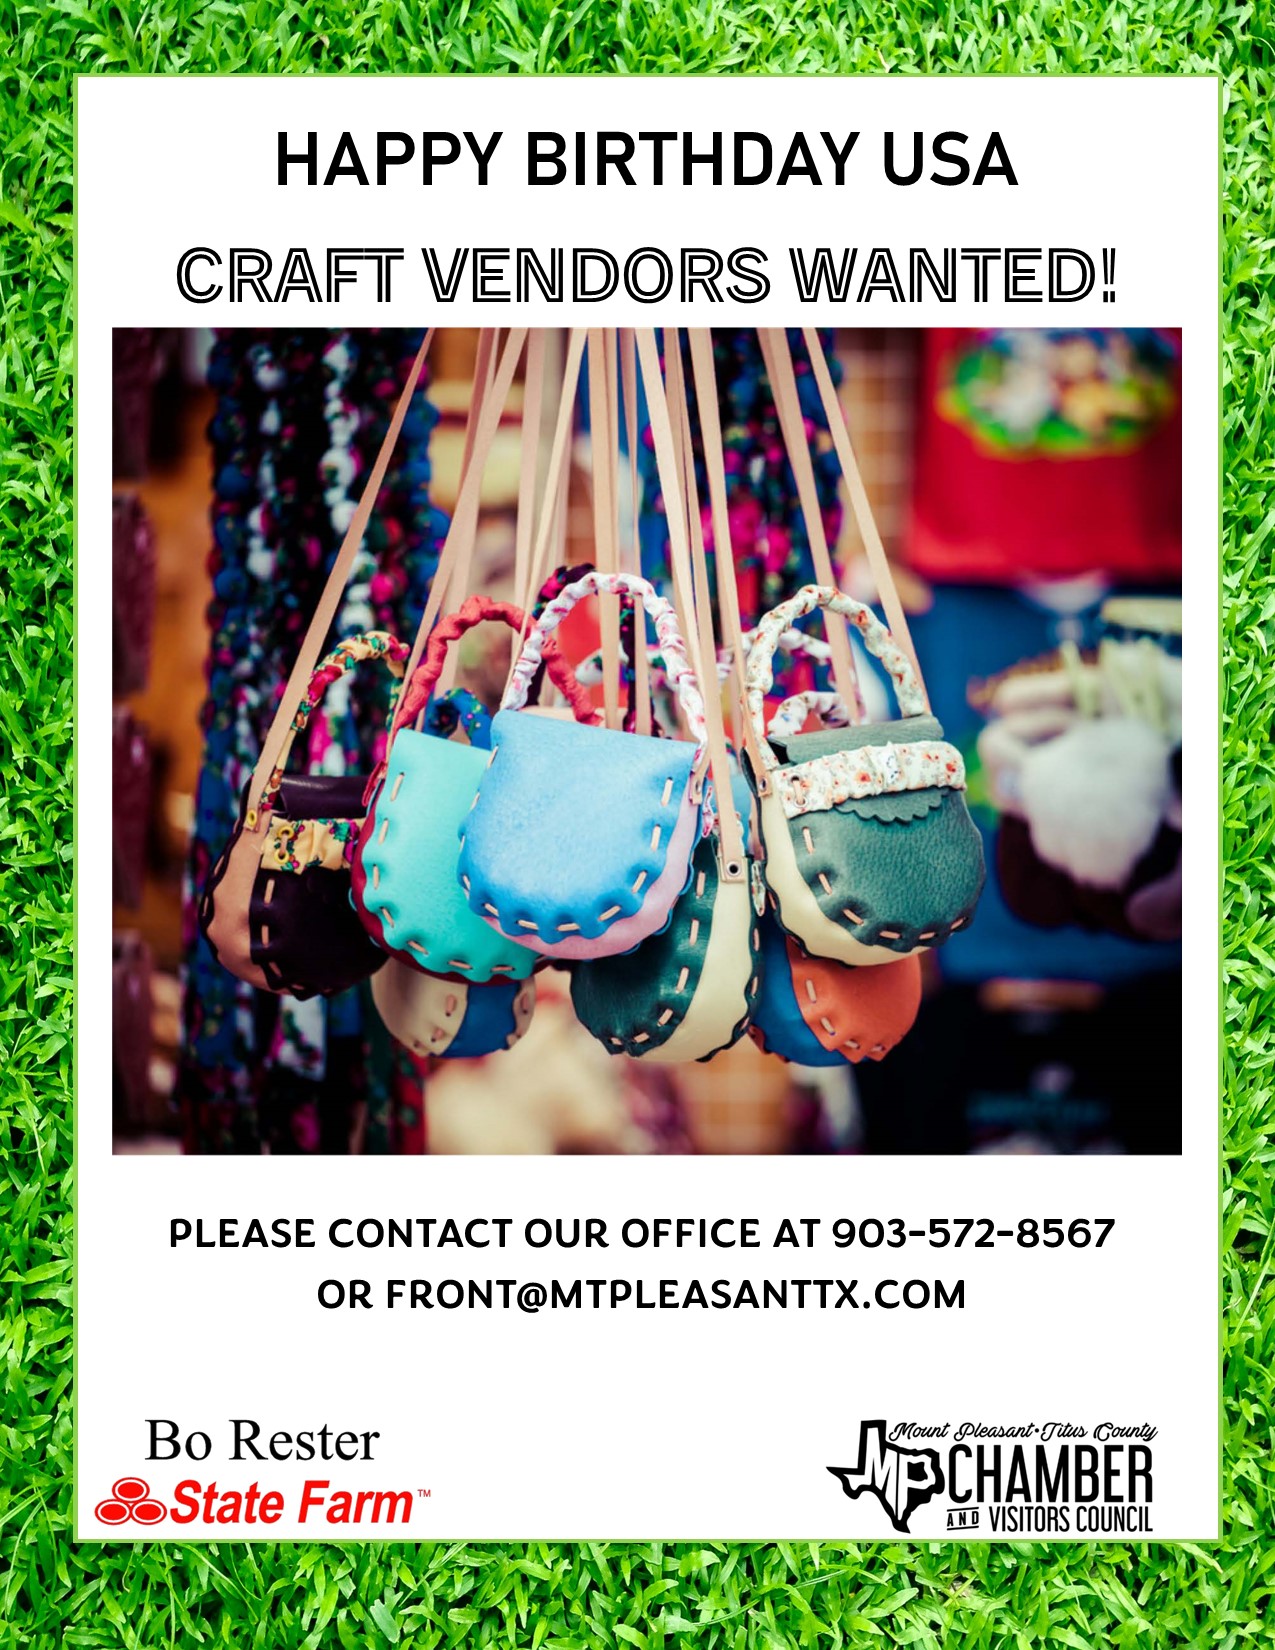 Vendors wanted